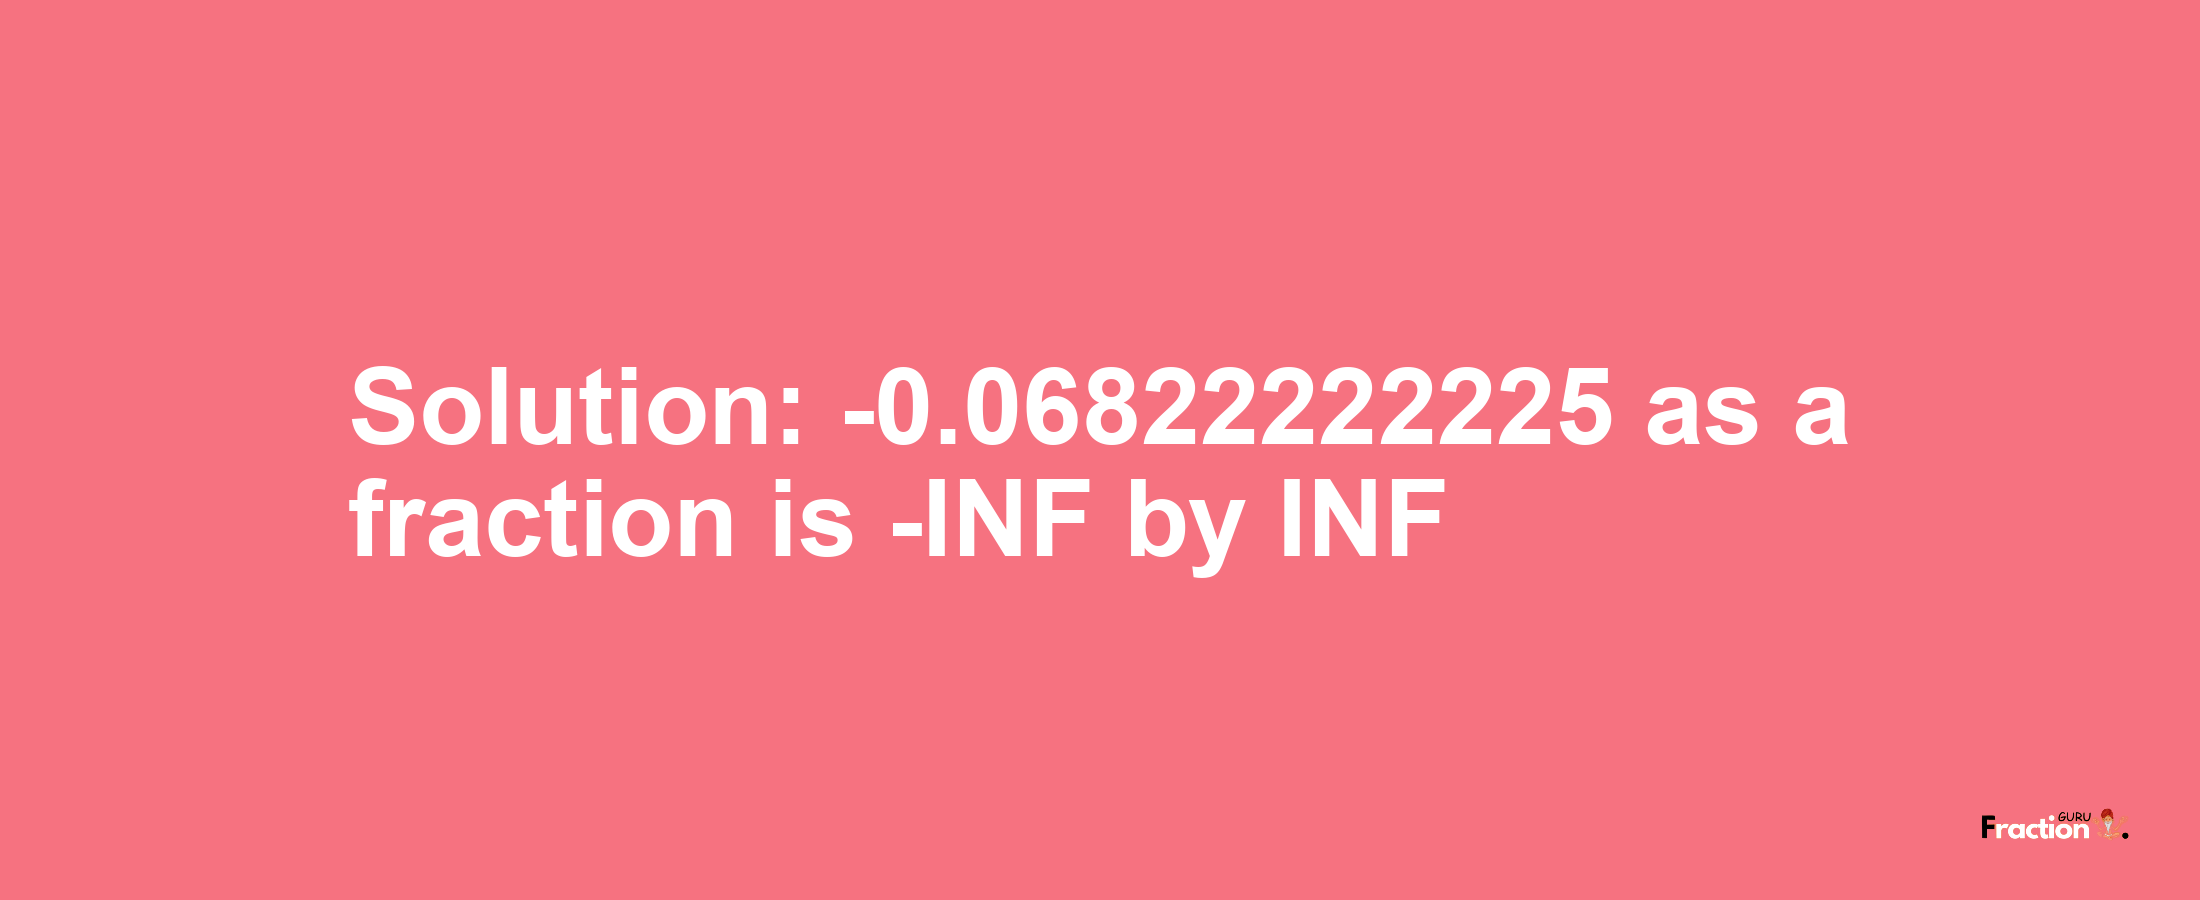 Solution:-0.06822222225 as a fraction is -INF/INF